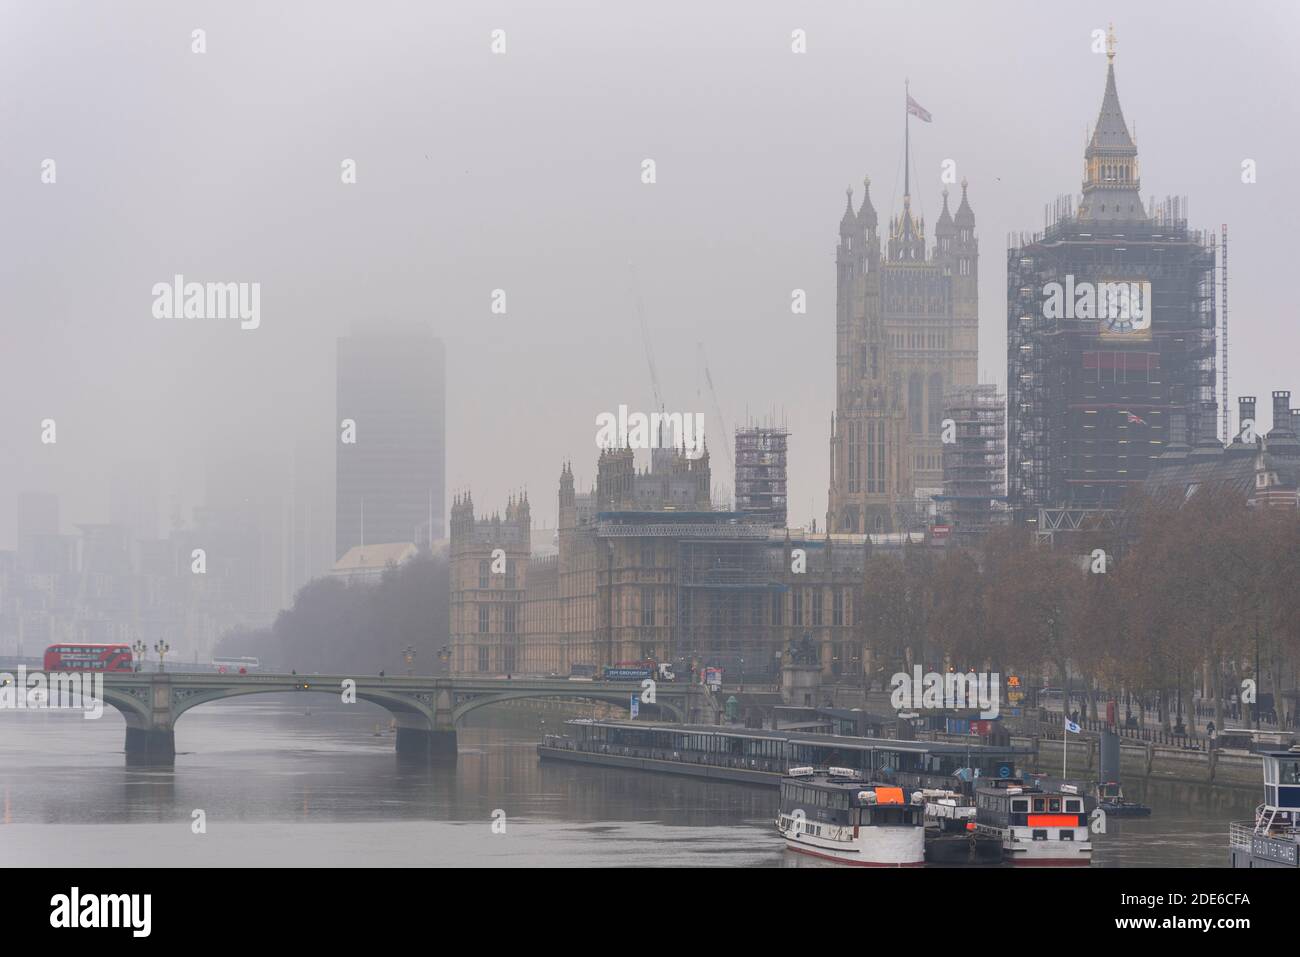 Foggy morning in London. Palace of Westminster, Parliament, on a grim, dull day. Elizabeth Tower, Big Ben, shrouded in scaffolding for renovation Stock Photo